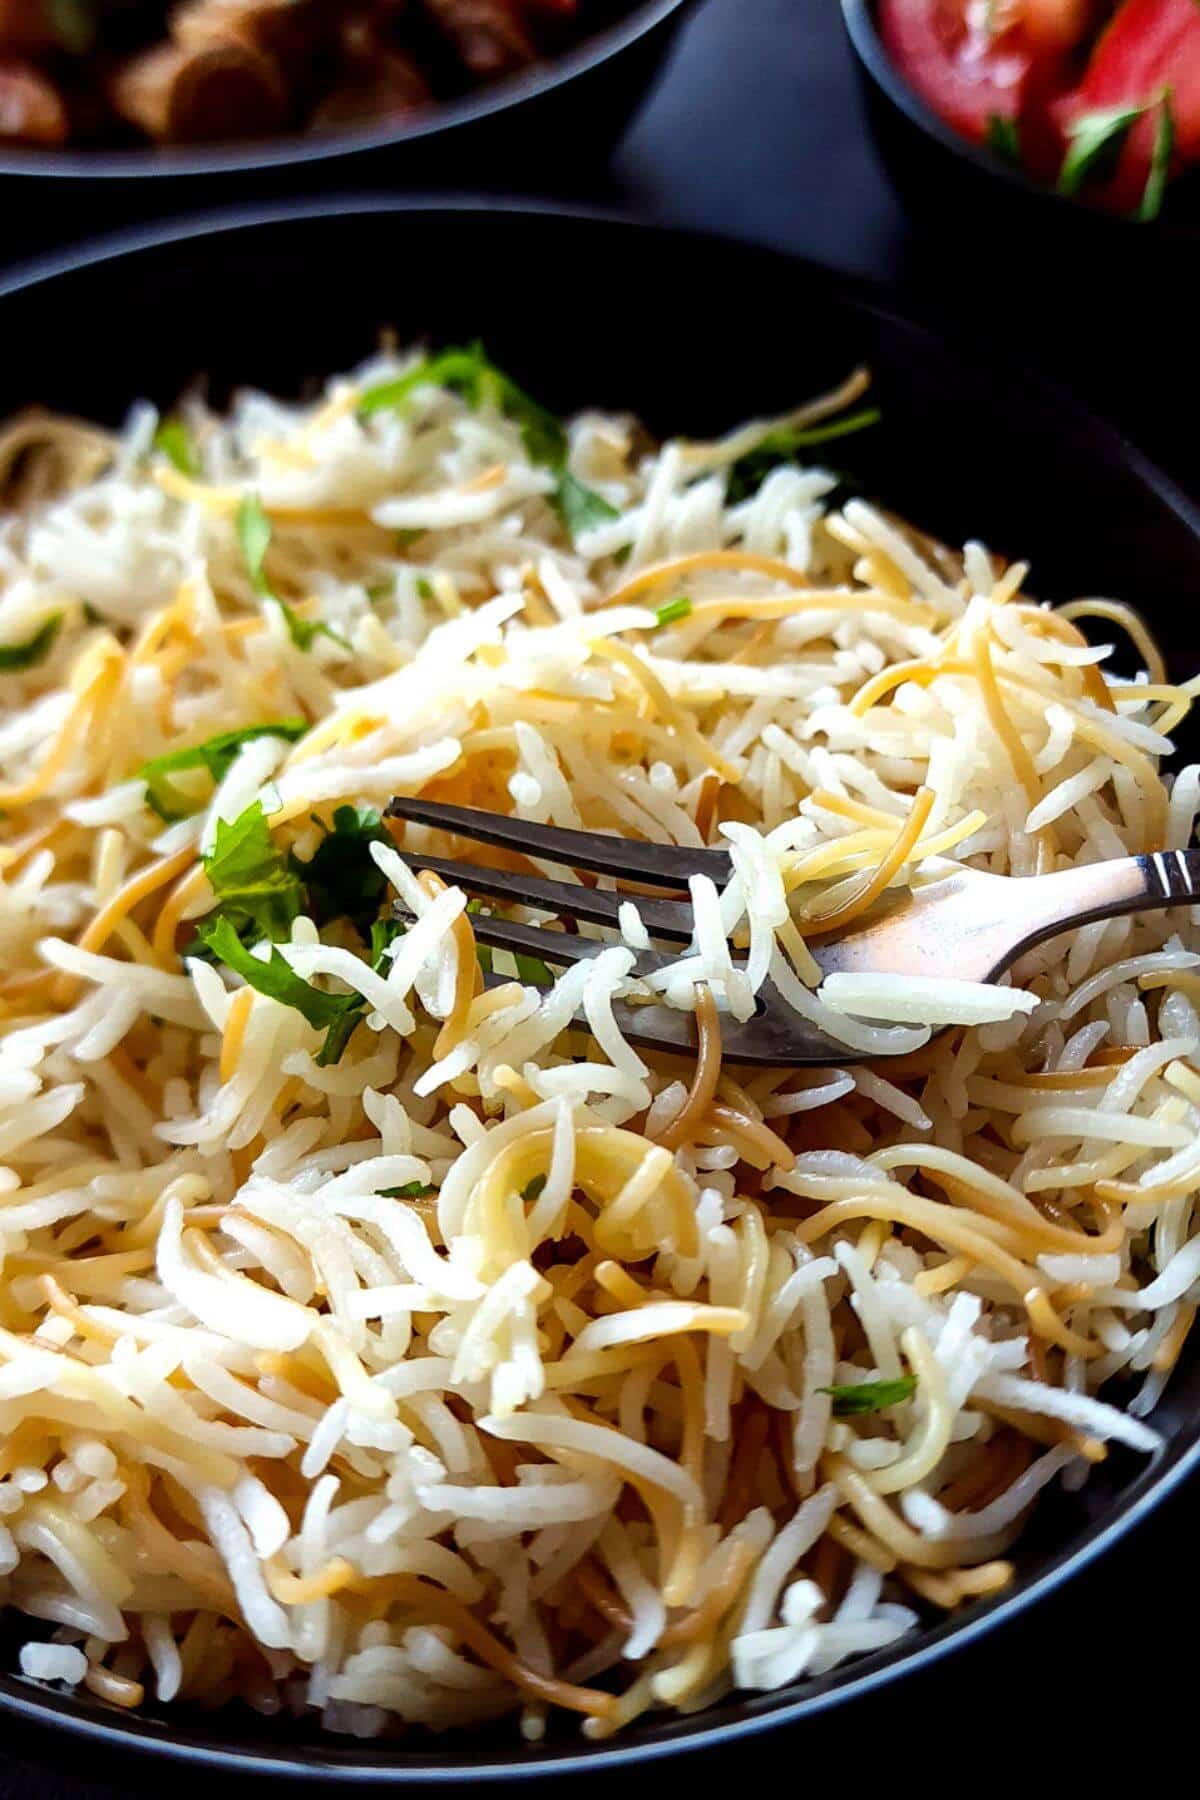 Lebanese vermicelli rice in a black bowl with a fork.